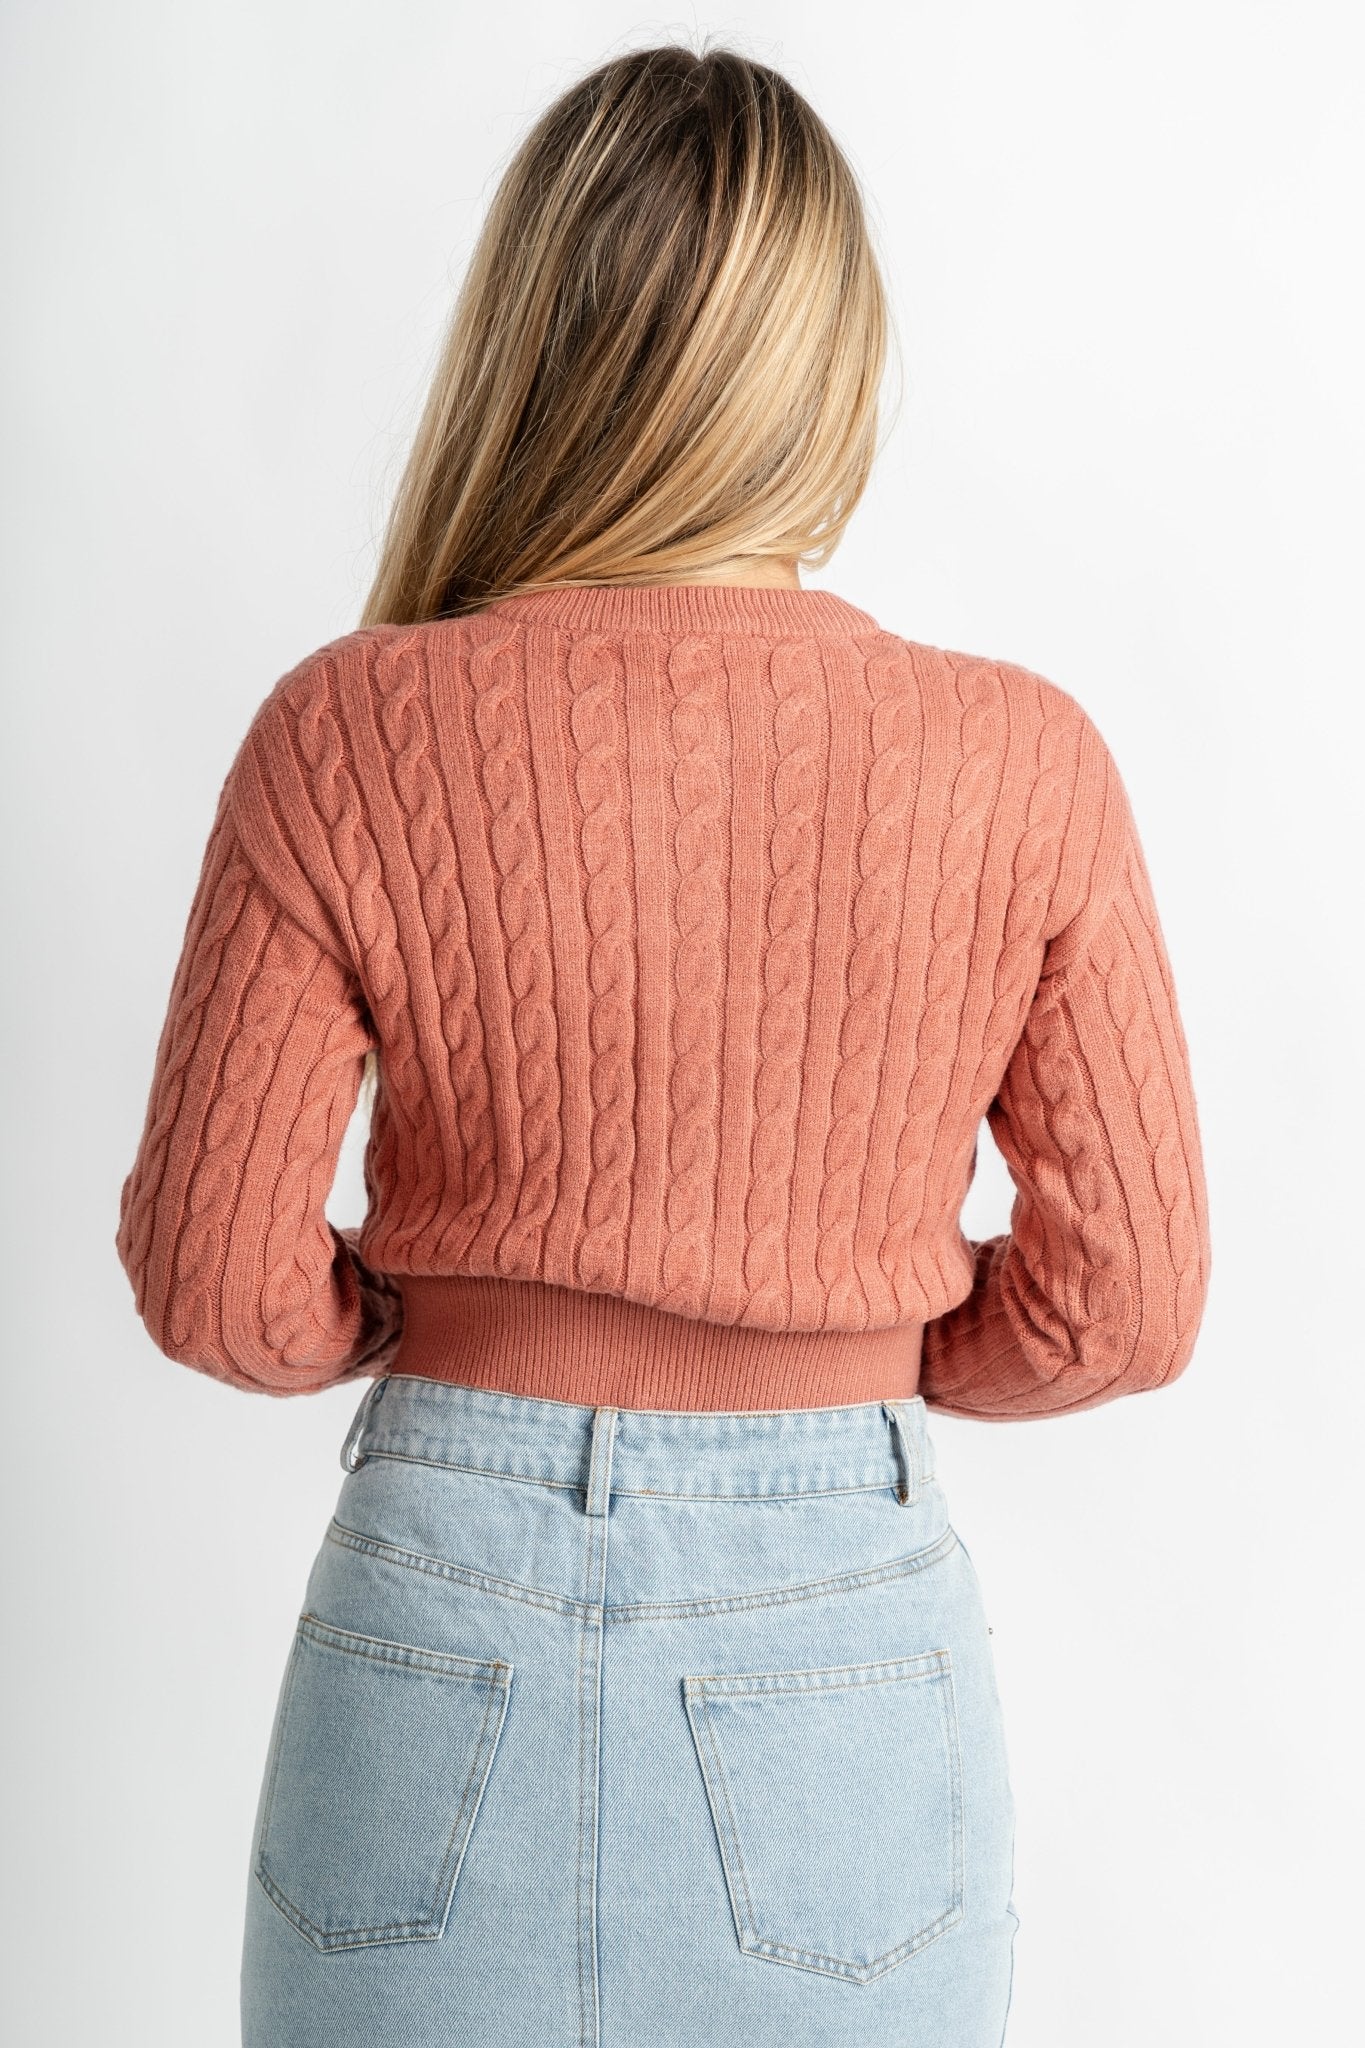 Geneva sweater cardigan ginger crush – Unique Sweaters | Lounging Sweaters and Womens Fashion Sweaters at Lush Fashion Lounge Boutique in Oklahoma City